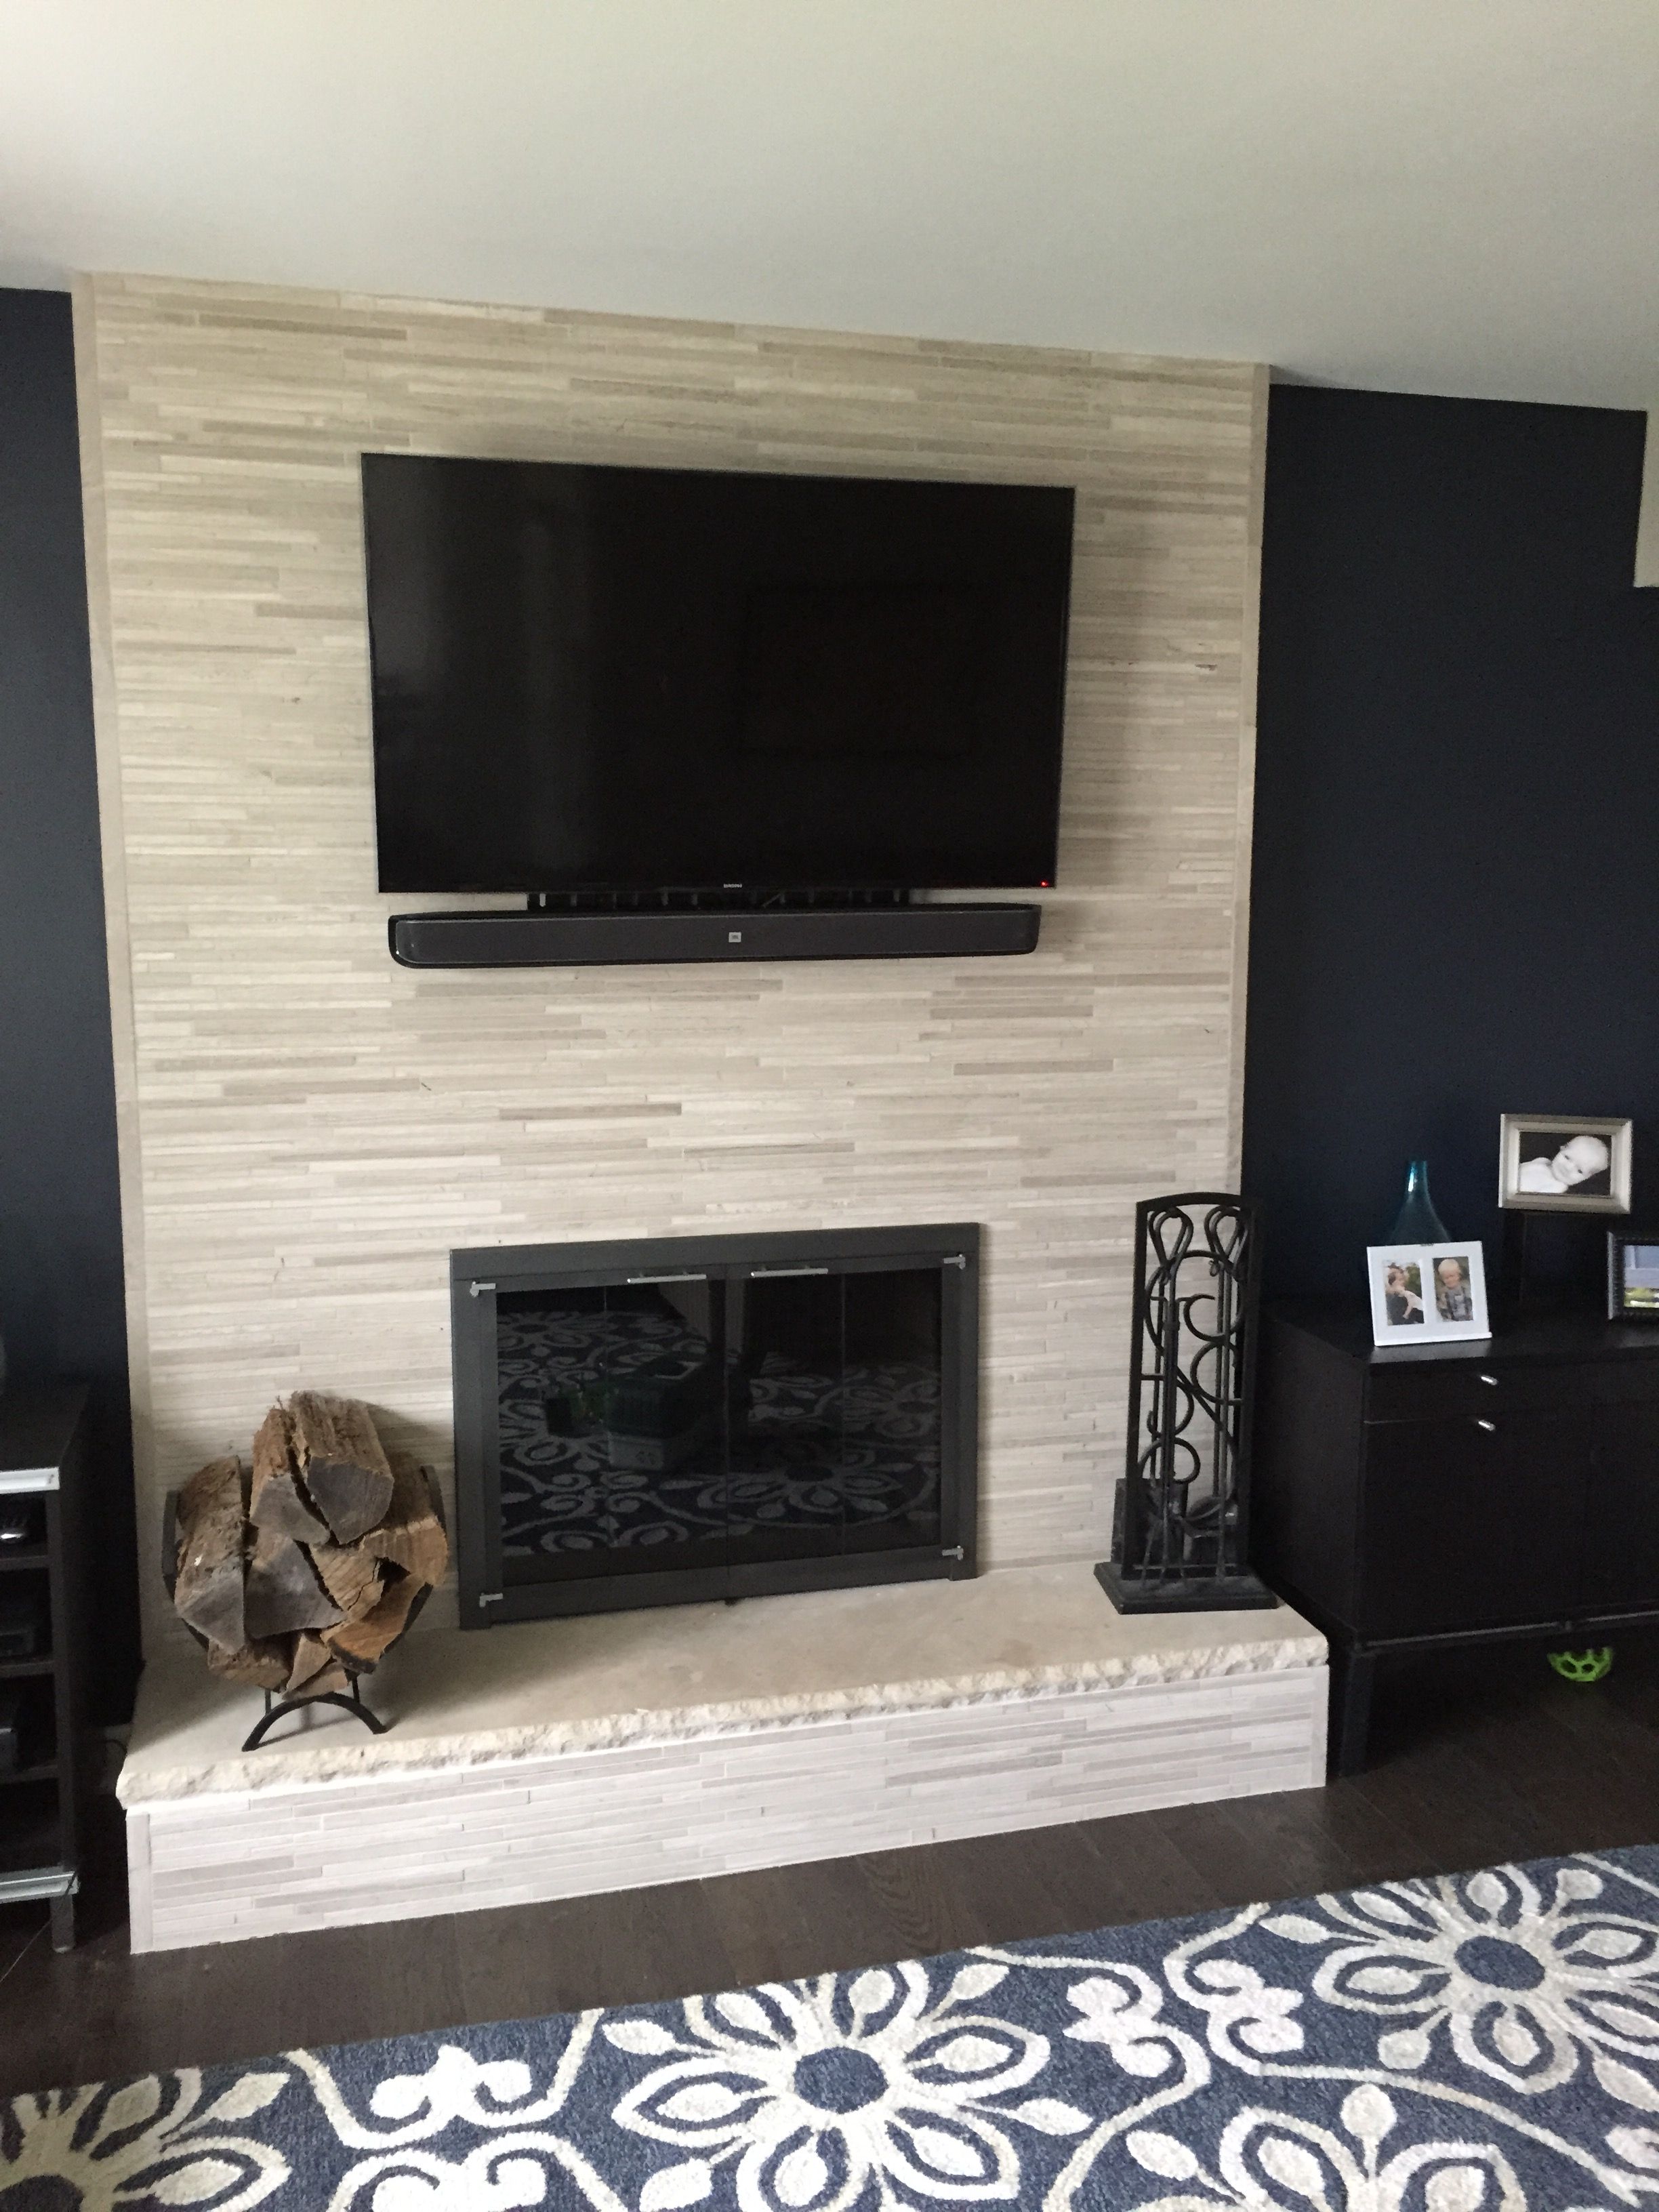 Hanging Tv On Brick Fireplace Awesome Our Old Fireplace Was 80 S 90 S Brick Veneer to Give It An